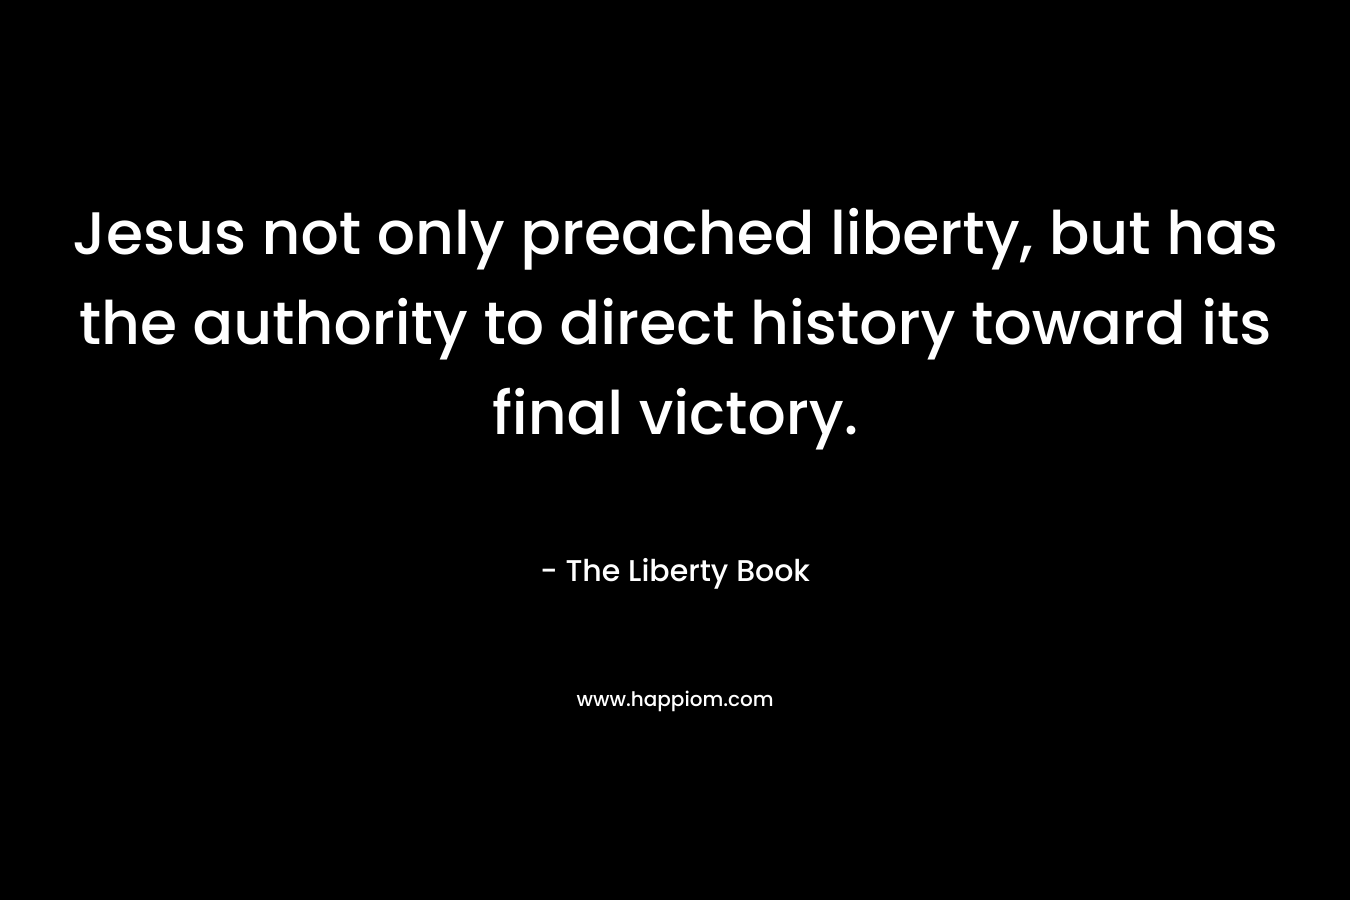 Jesus not only preached liberty, but has the authority to direct history toward its final victory.